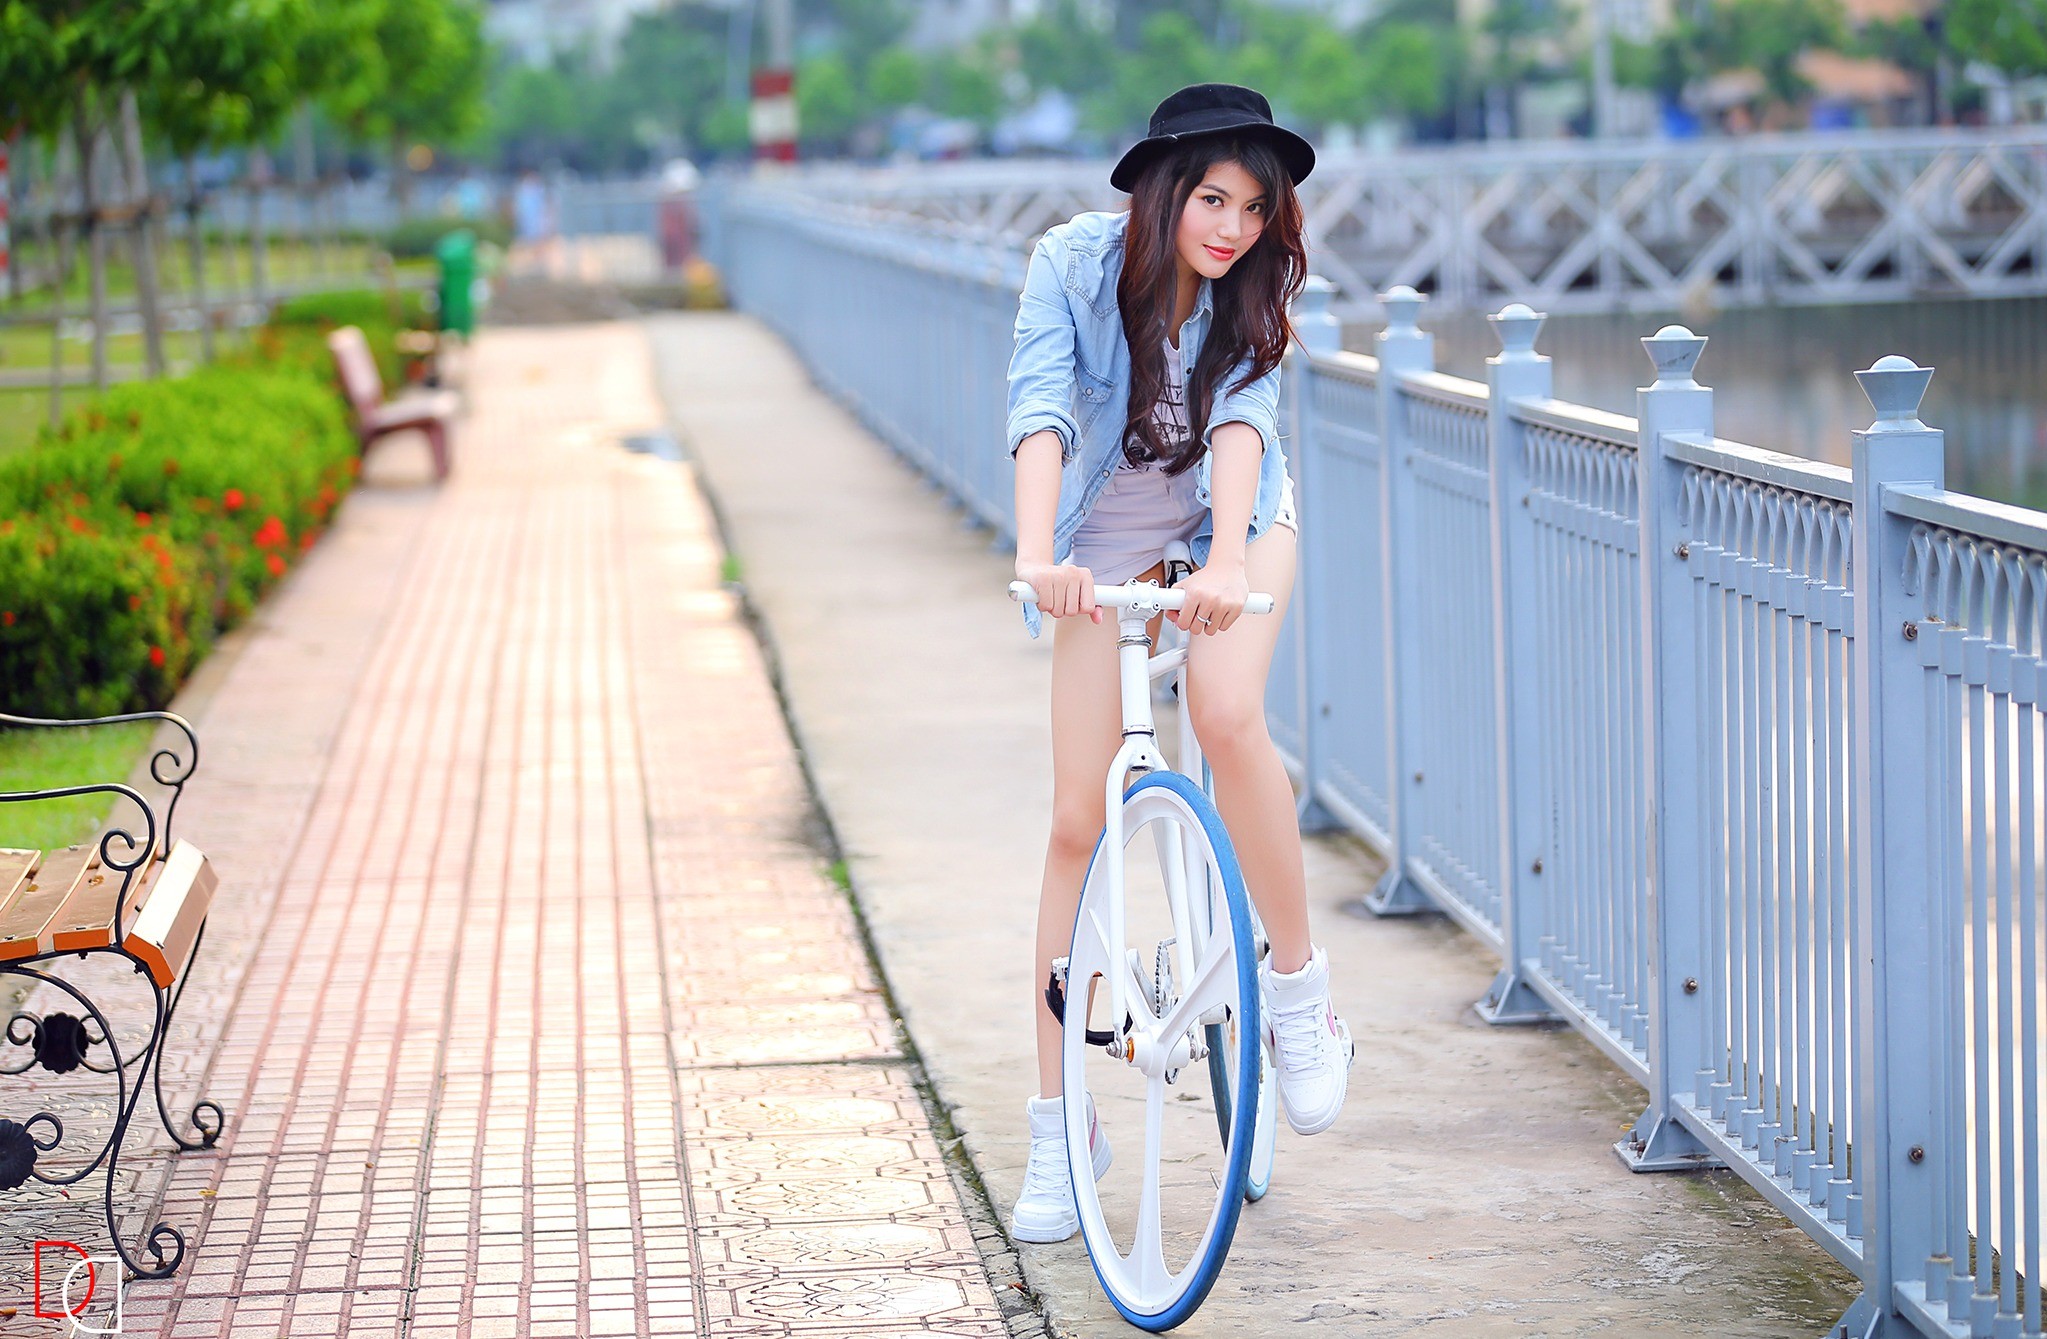 People 2047x1339 Asian women bicycle outdoors brunette long hair wavy hair looking at viewer hat millinery fixie vehicle women with bicycles women with hats women outdoors urban smiling model